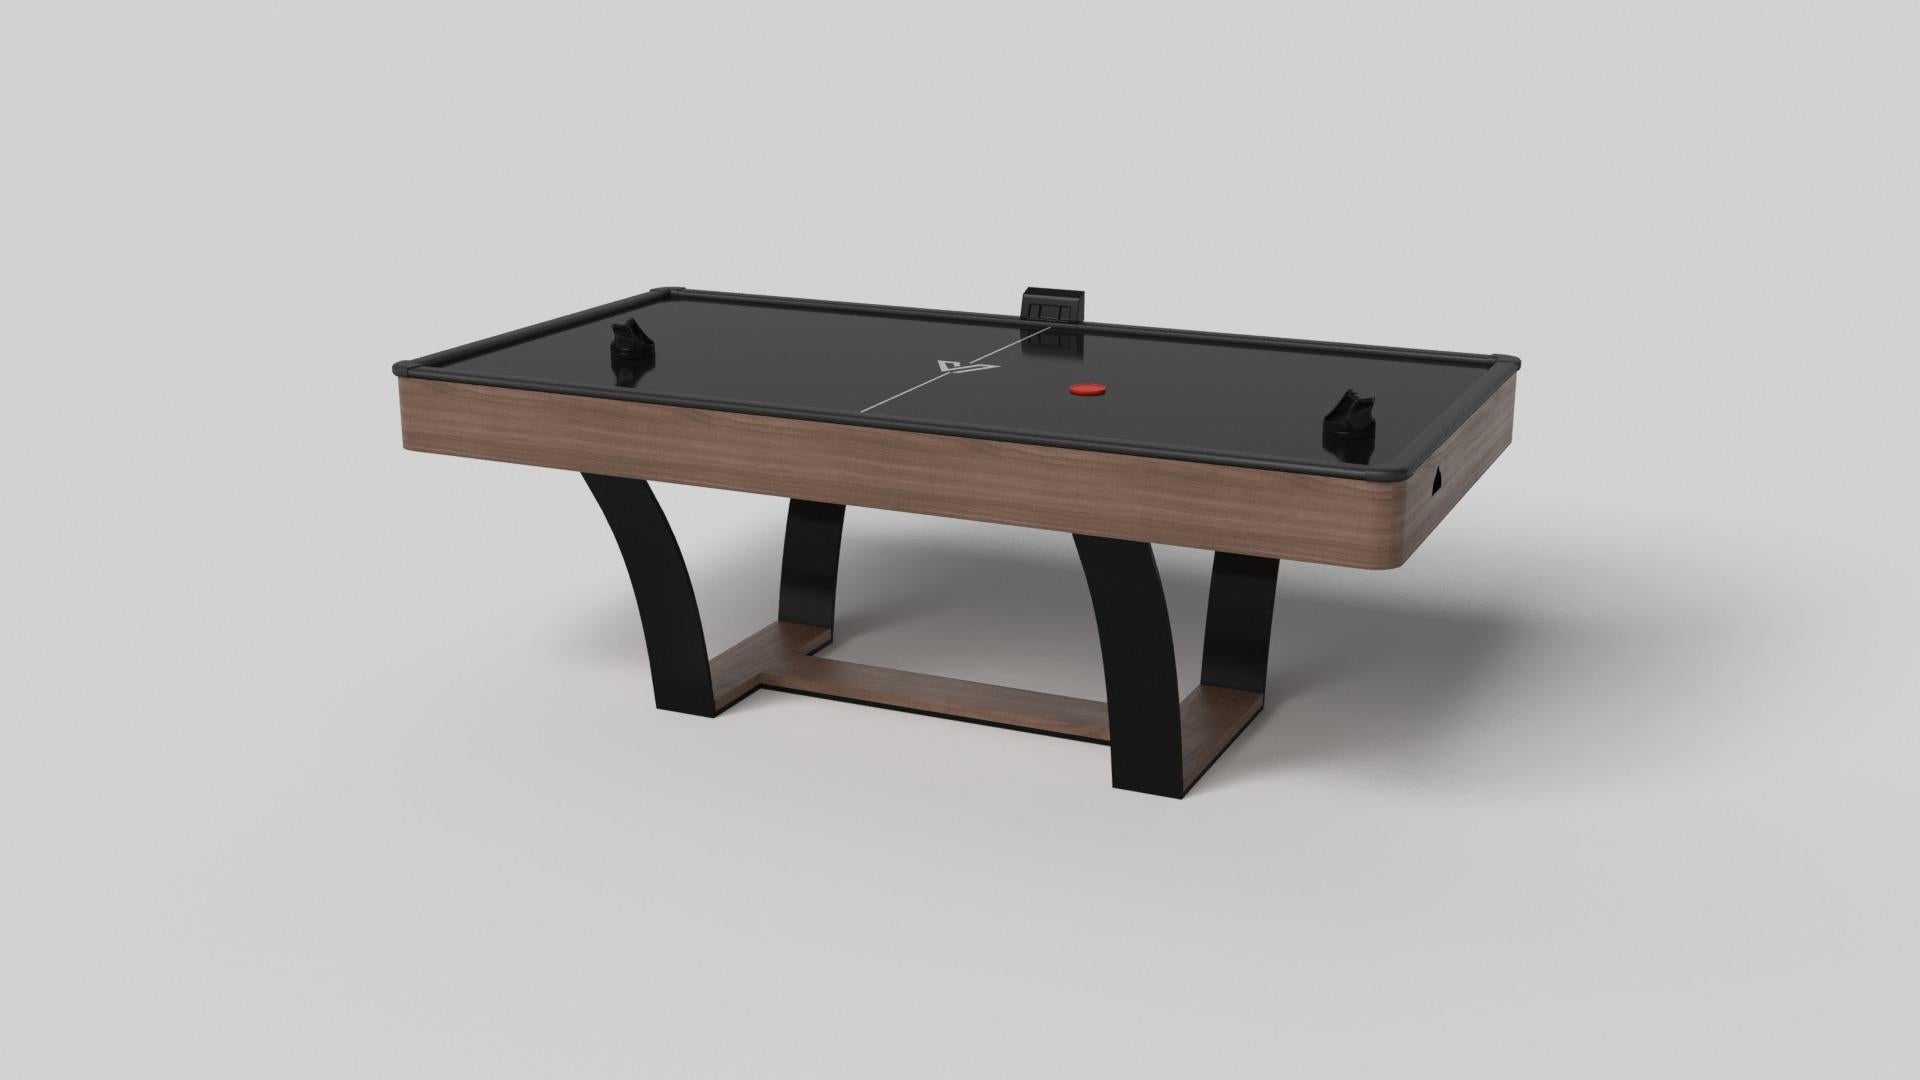 With an I-shaped metal base, slightly sloped metal legs, and a contrasting wood top, the Elite air hockey table exudes modern sophistication while evoking a sense of art deco design. This table is a confluence of style, made to meet today's demands